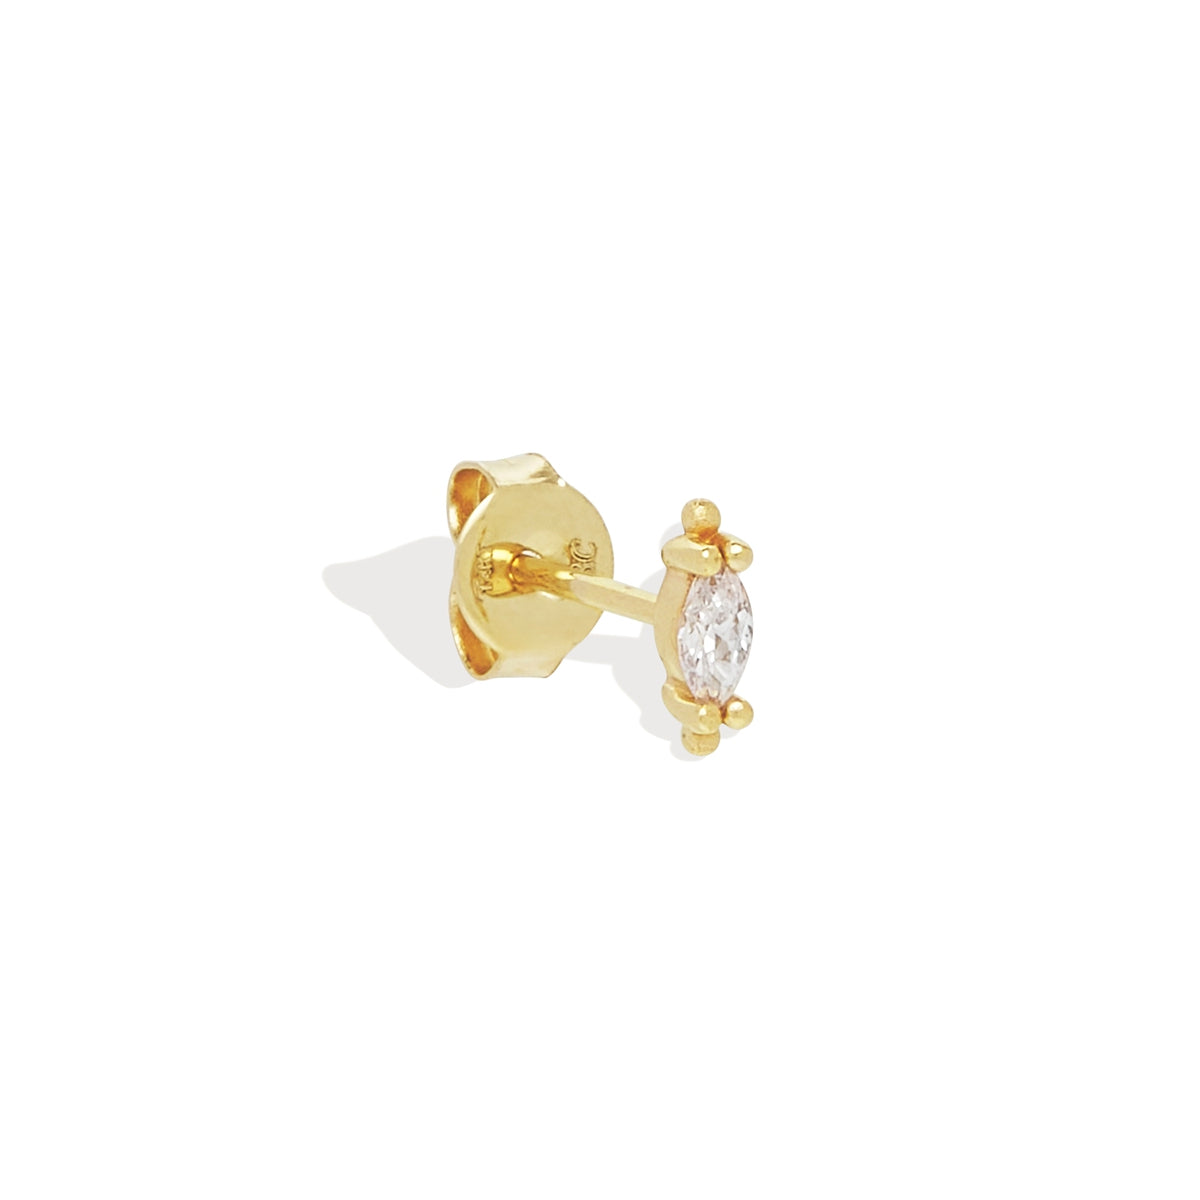 By Charlotte 14k Gold Radiance Crystal Single Stud Earring